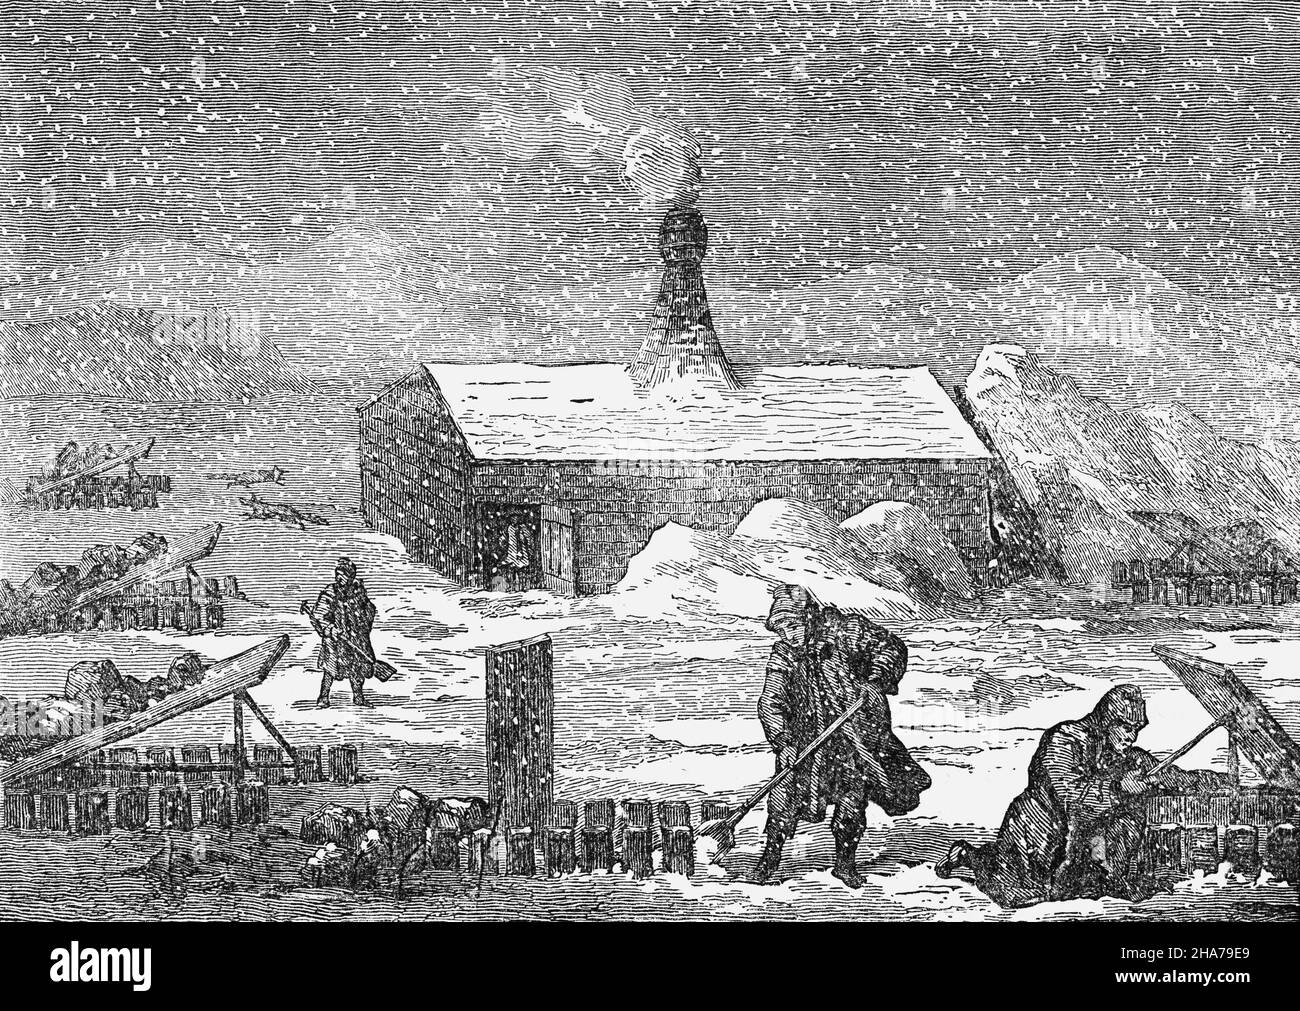 A late 19th Century illustration of a quintessential winter scene in Siberia, an extensive geographical region, from the Ural Mountains in the west to the Pacific Ocean in the east and part of Russia since the latter half of the 16th century, after the Russians conquered lands east of the Ural Mountains. Stock Photo